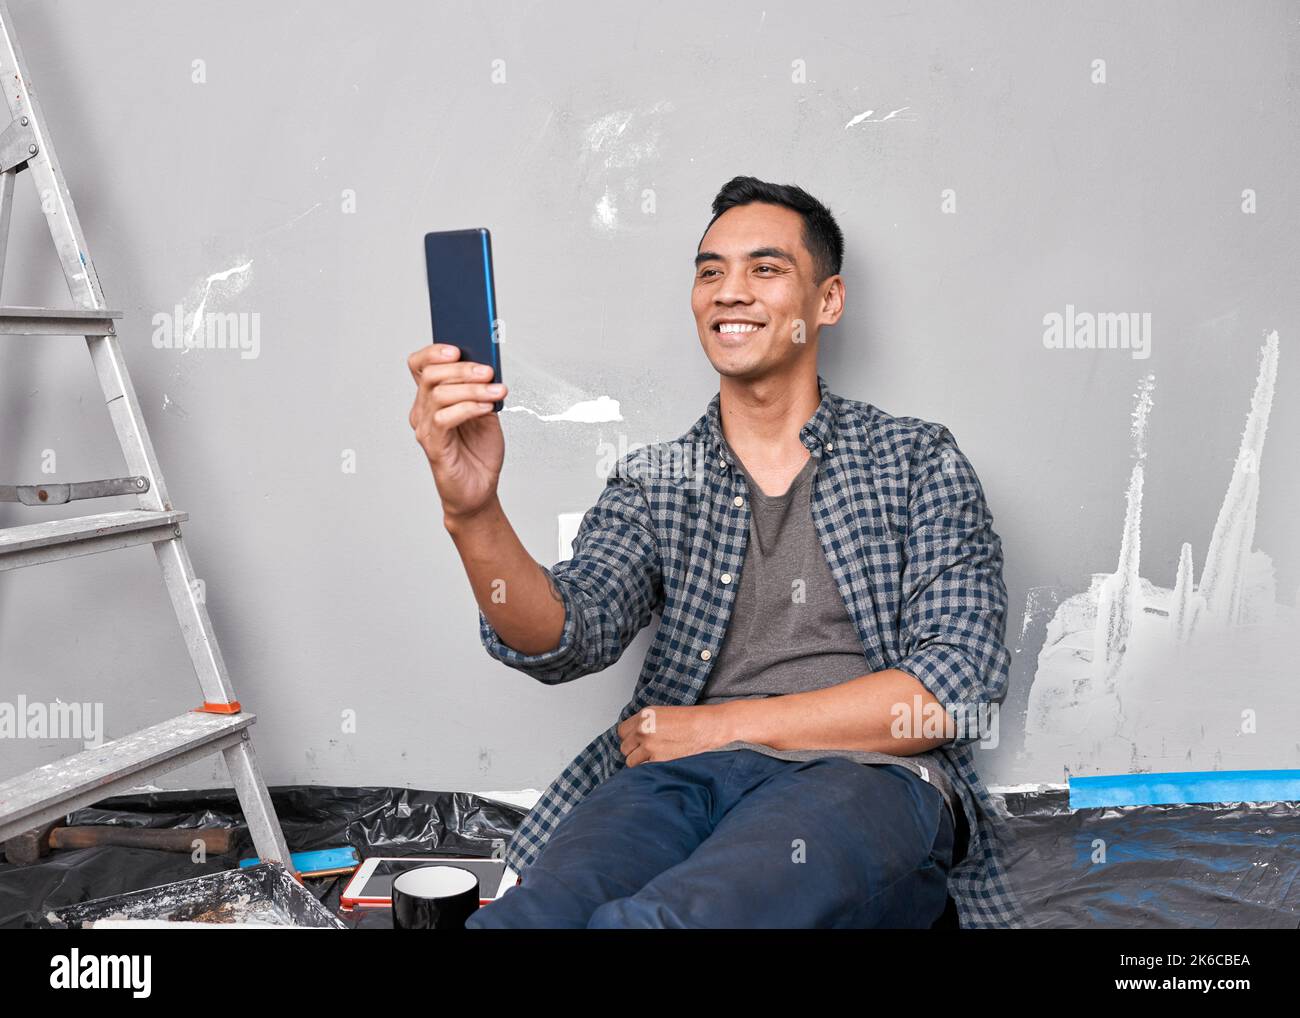 A young Asian man takes a selfie while busy with home improvement DIY project Stock Photo